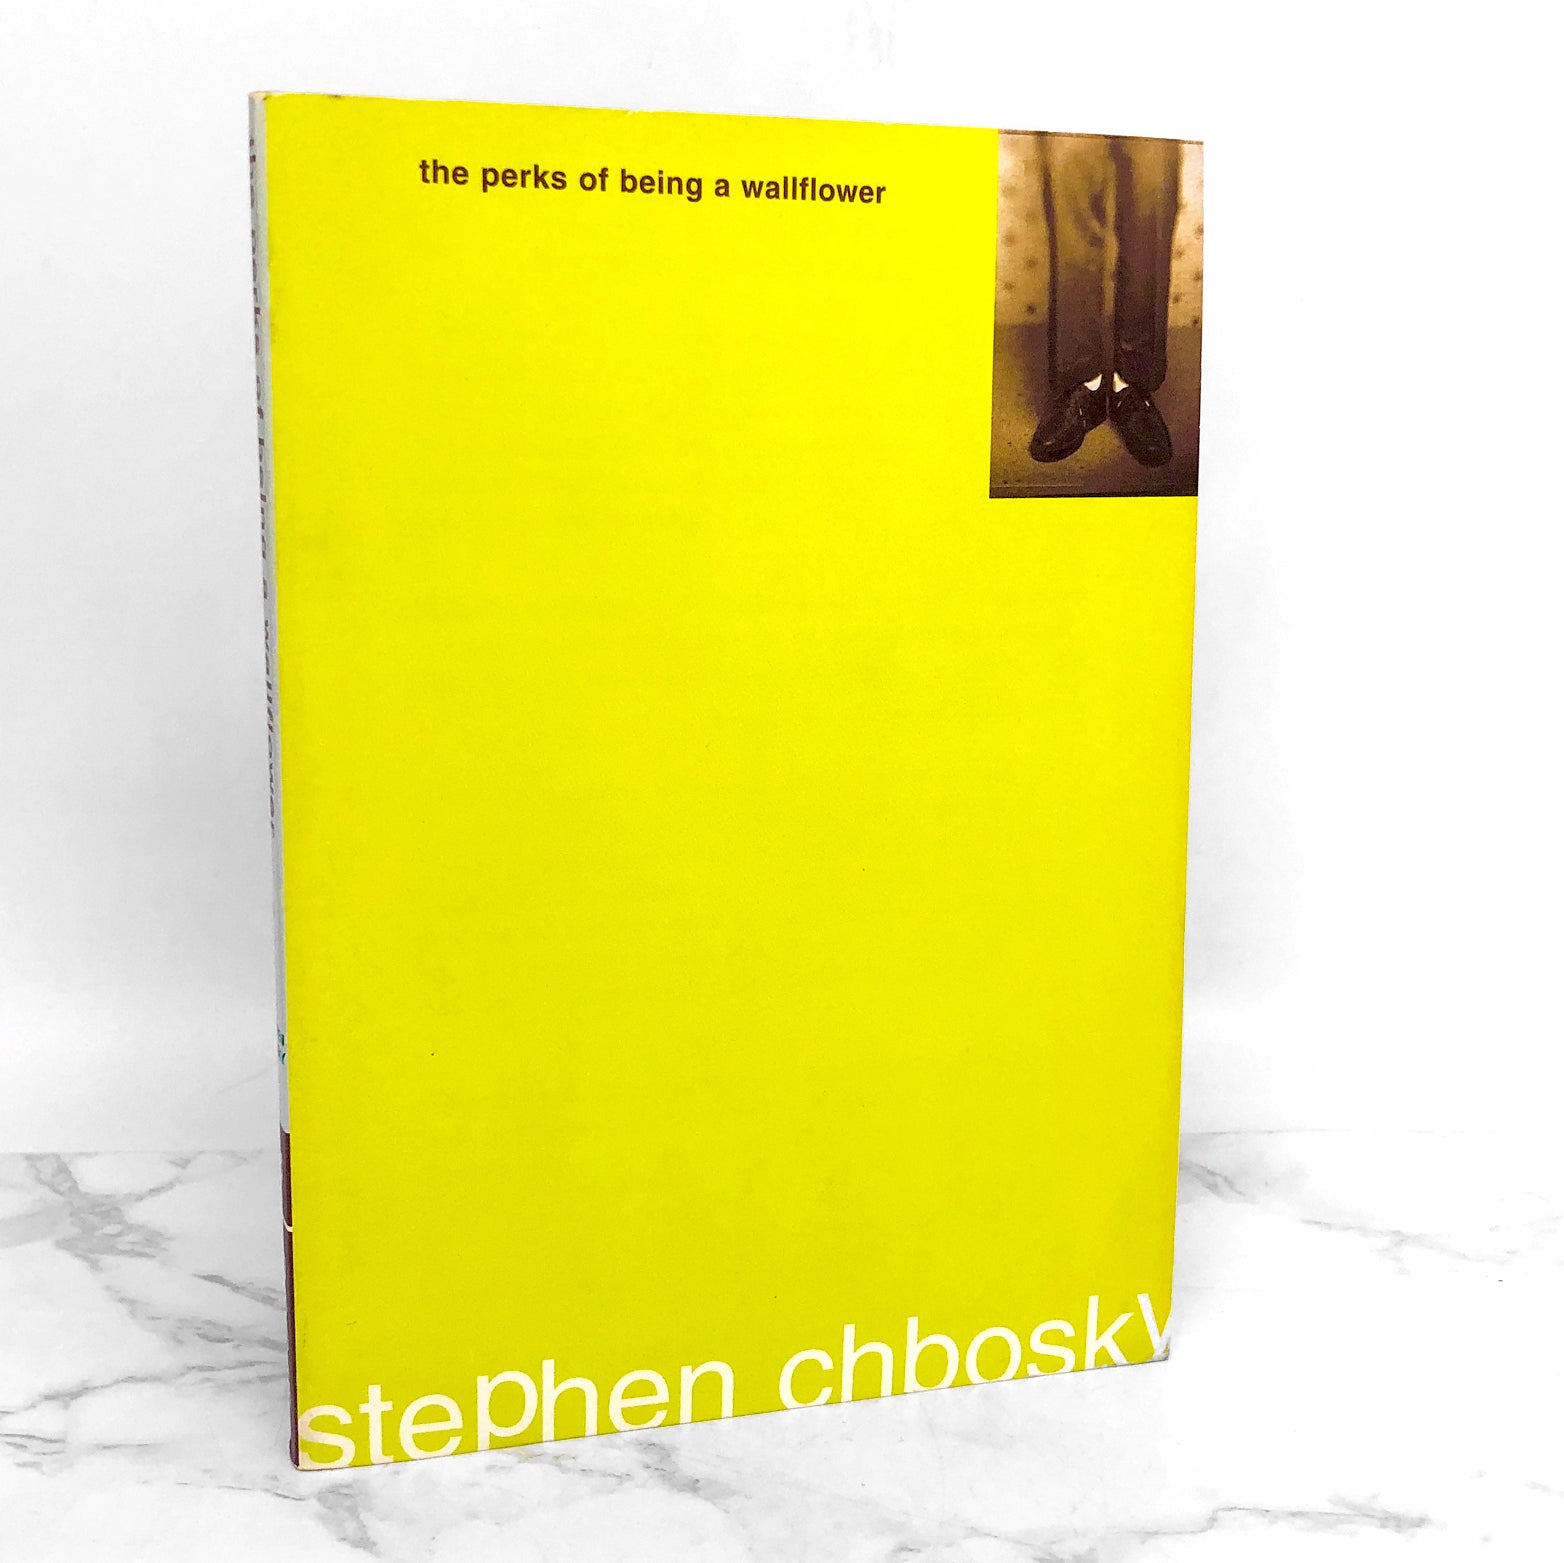 The Perks of Being a Wallflower (Paperback) by Stephen Chbosky